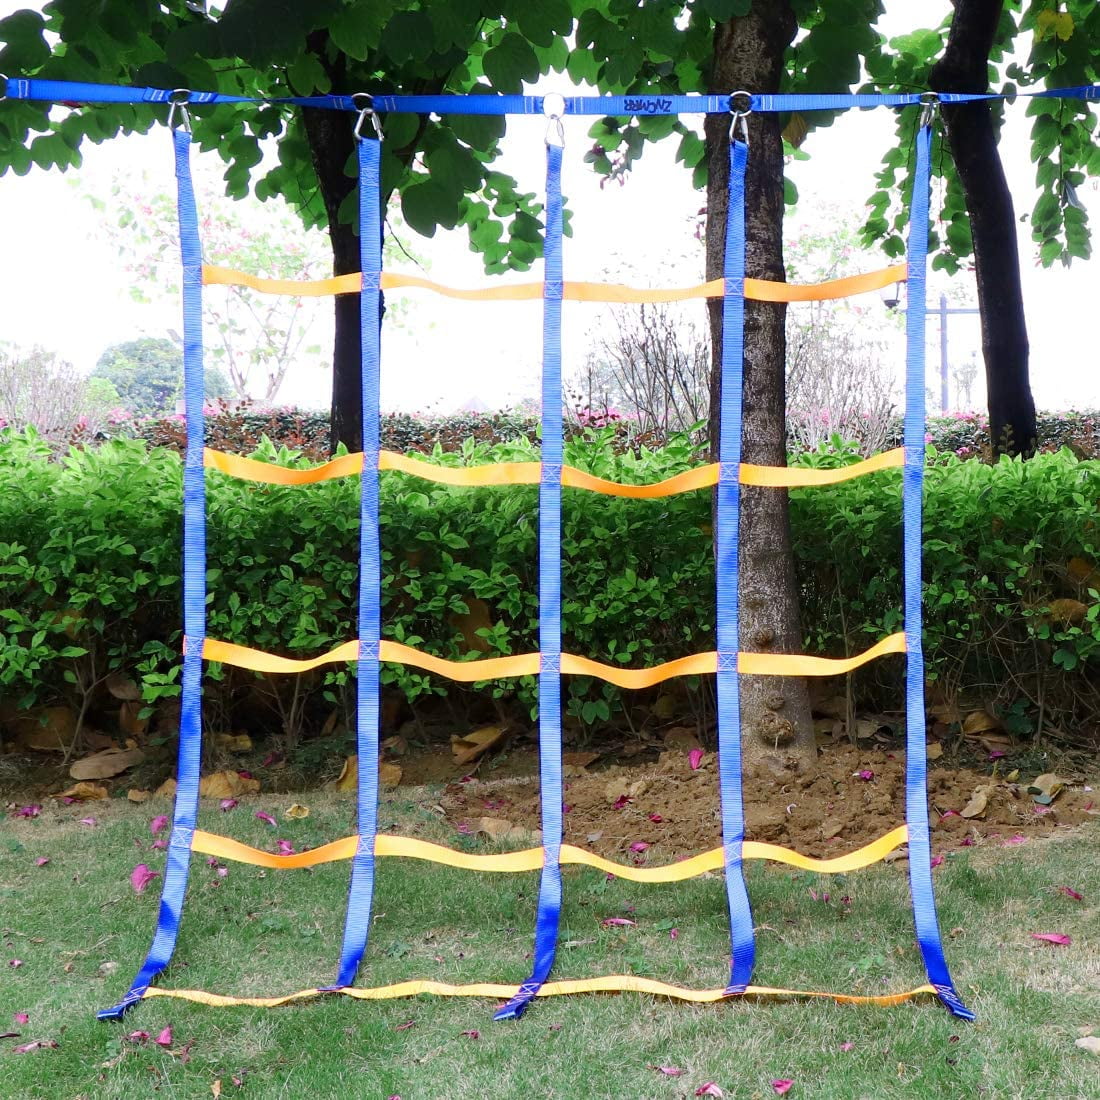 Swing Set Outdoor Backyard Play Sets & Playground Equipment for Ninja Line Ninja Warrior Style Obstacle Courses letsgood Colorful Climbing Cargo Net Jungle Gyms 